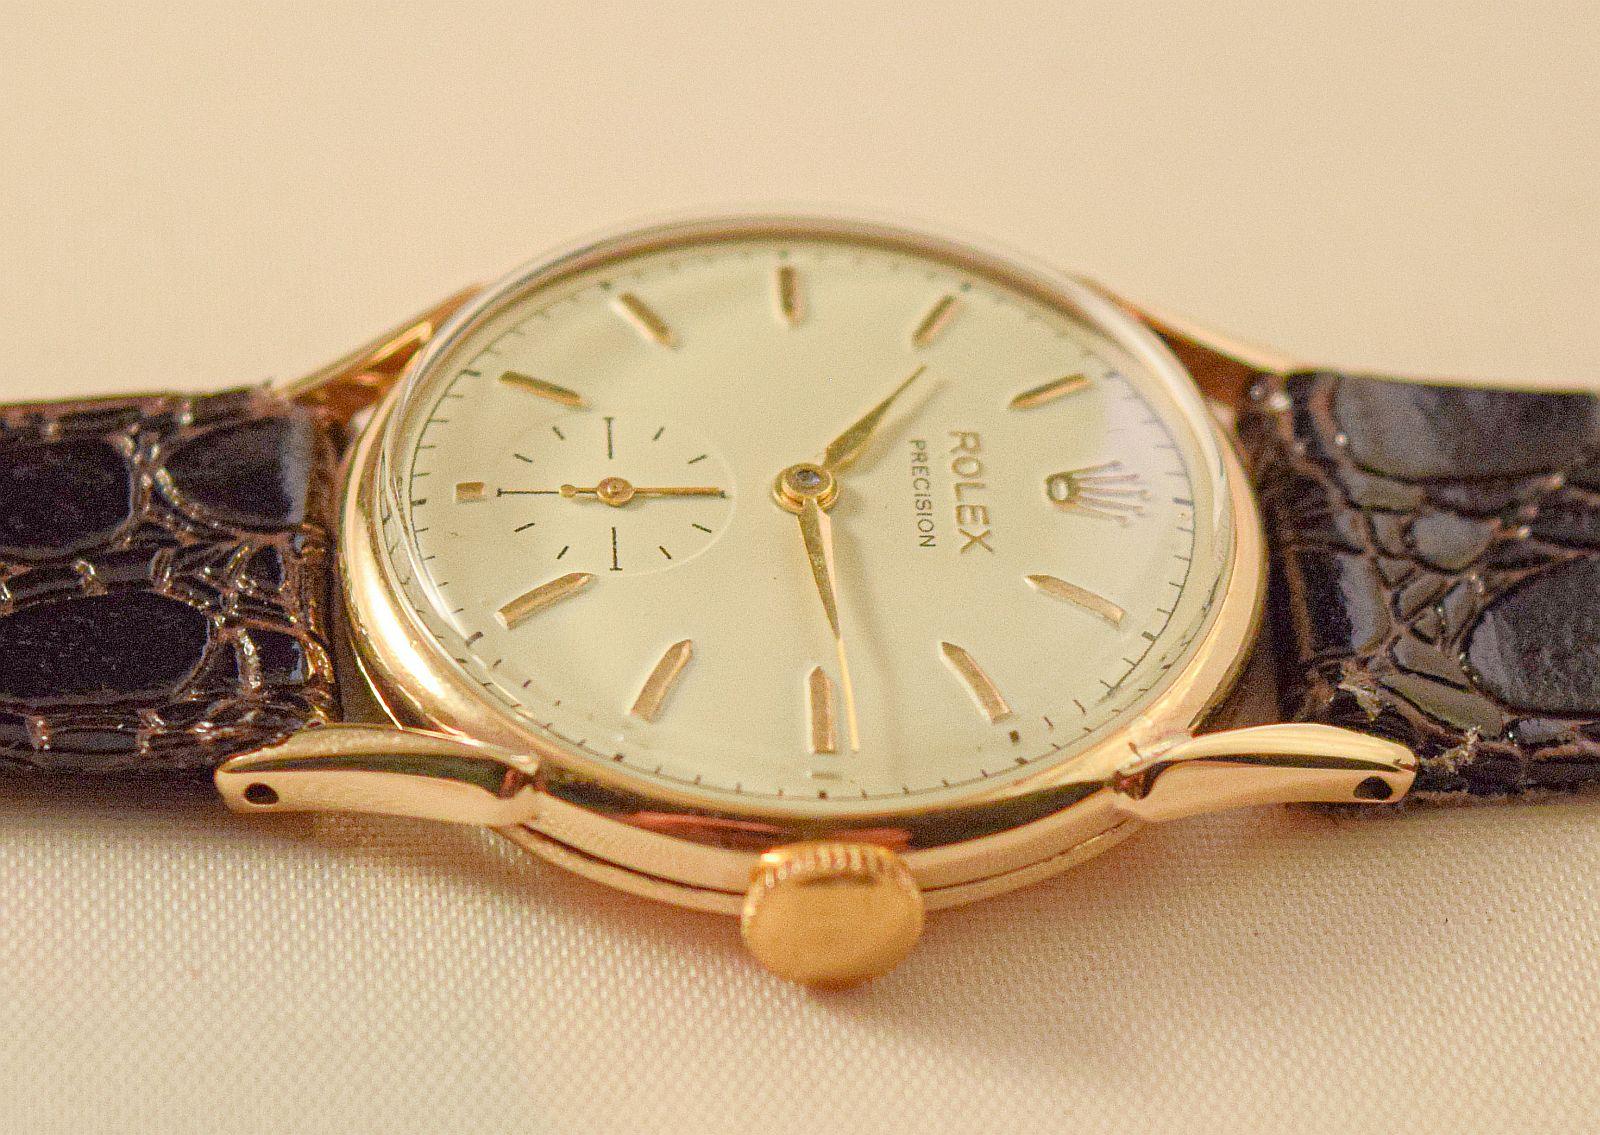 Rolex extremely rare solid gold watch with unusual lugs 2